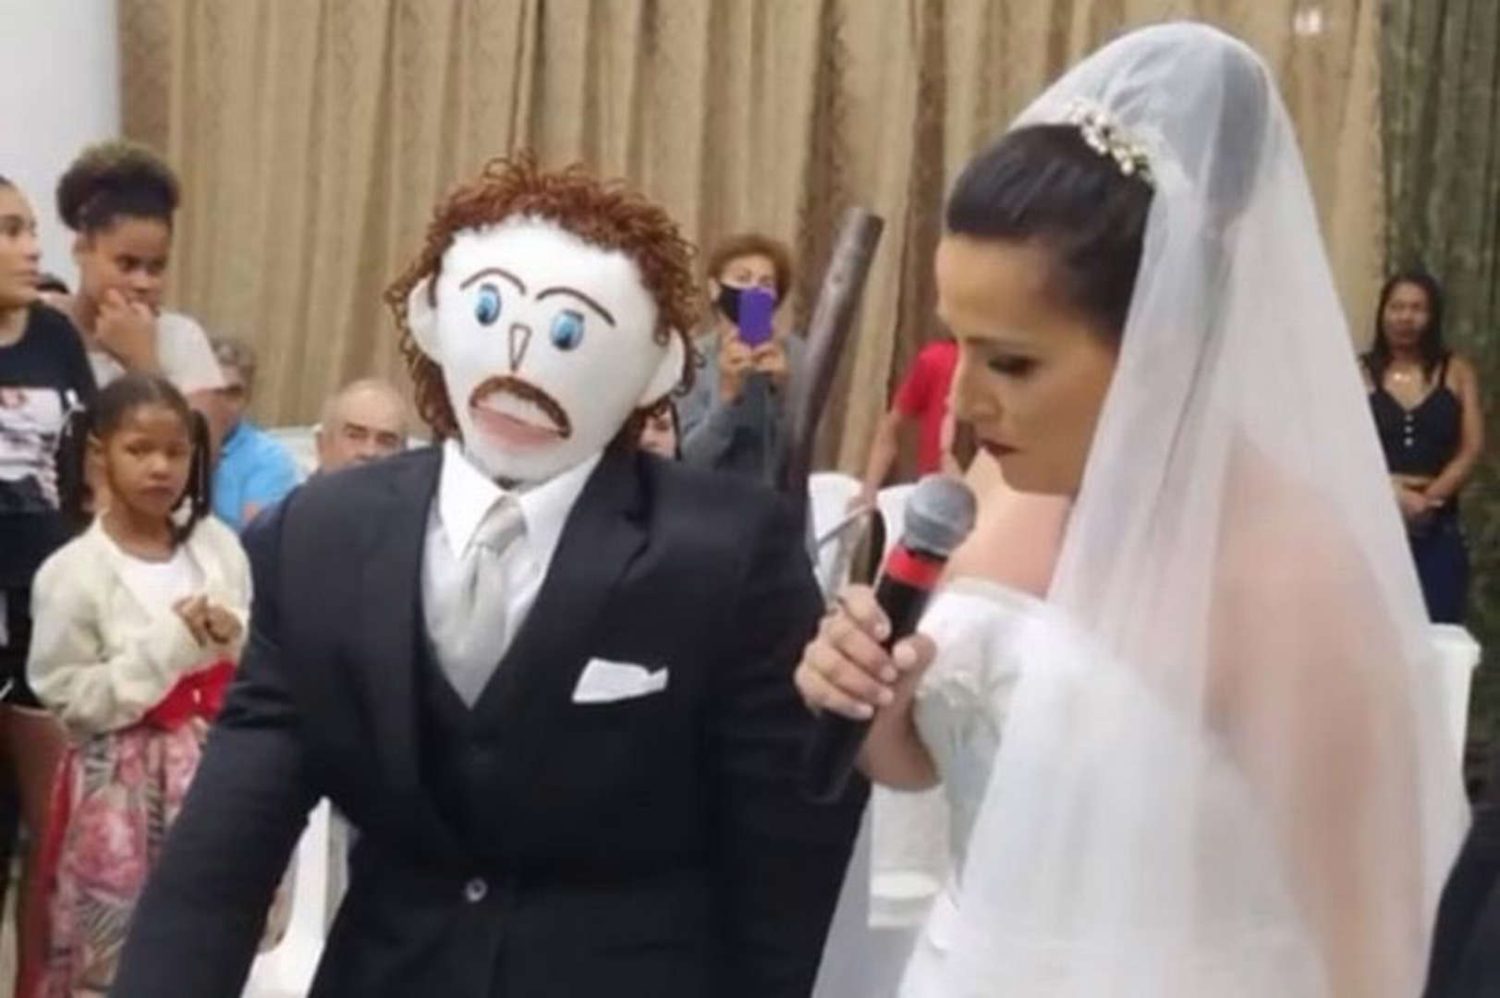 Woman Says Marriage With Doll Is "Hanging On A Thread" After He "Cheated'